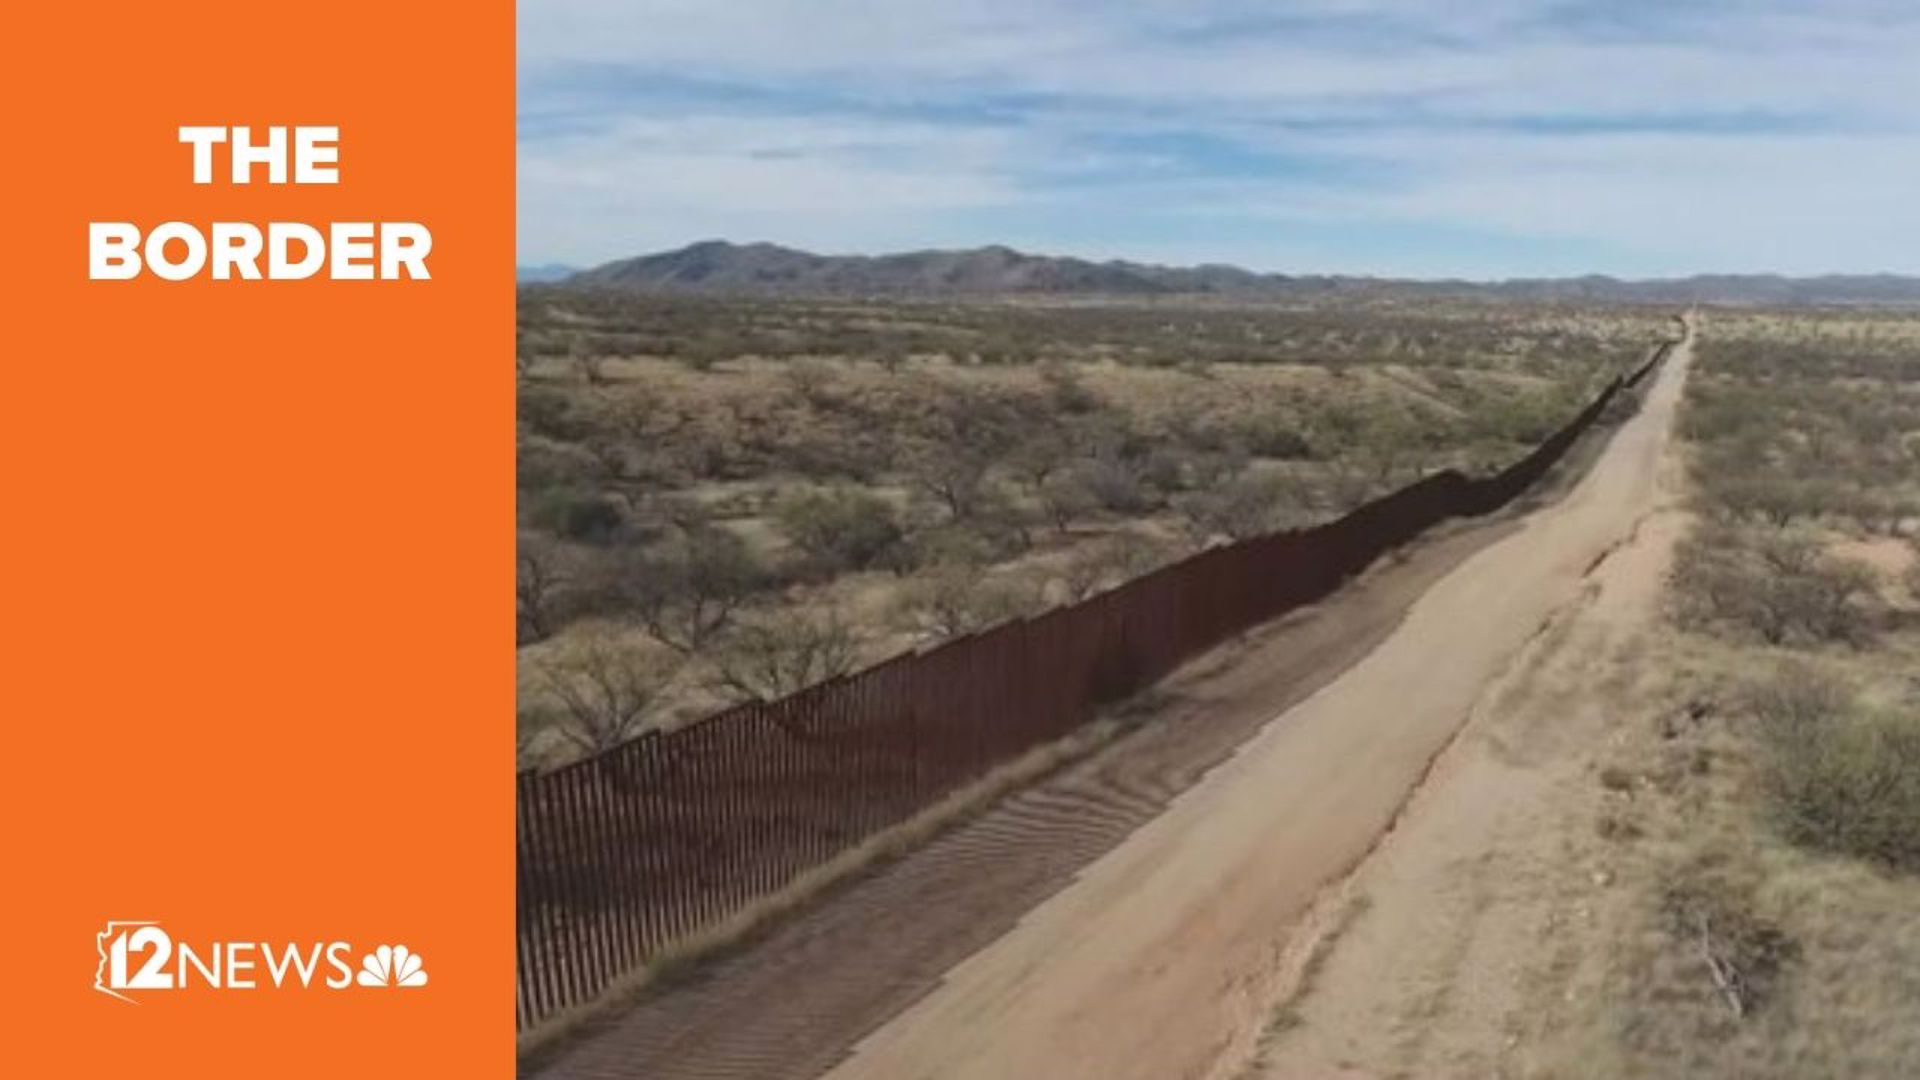 A crash that left 3 dead on I-10 near Eloy leaves Arizona officials concerned over border surge when COVID border restrictions ease next month.